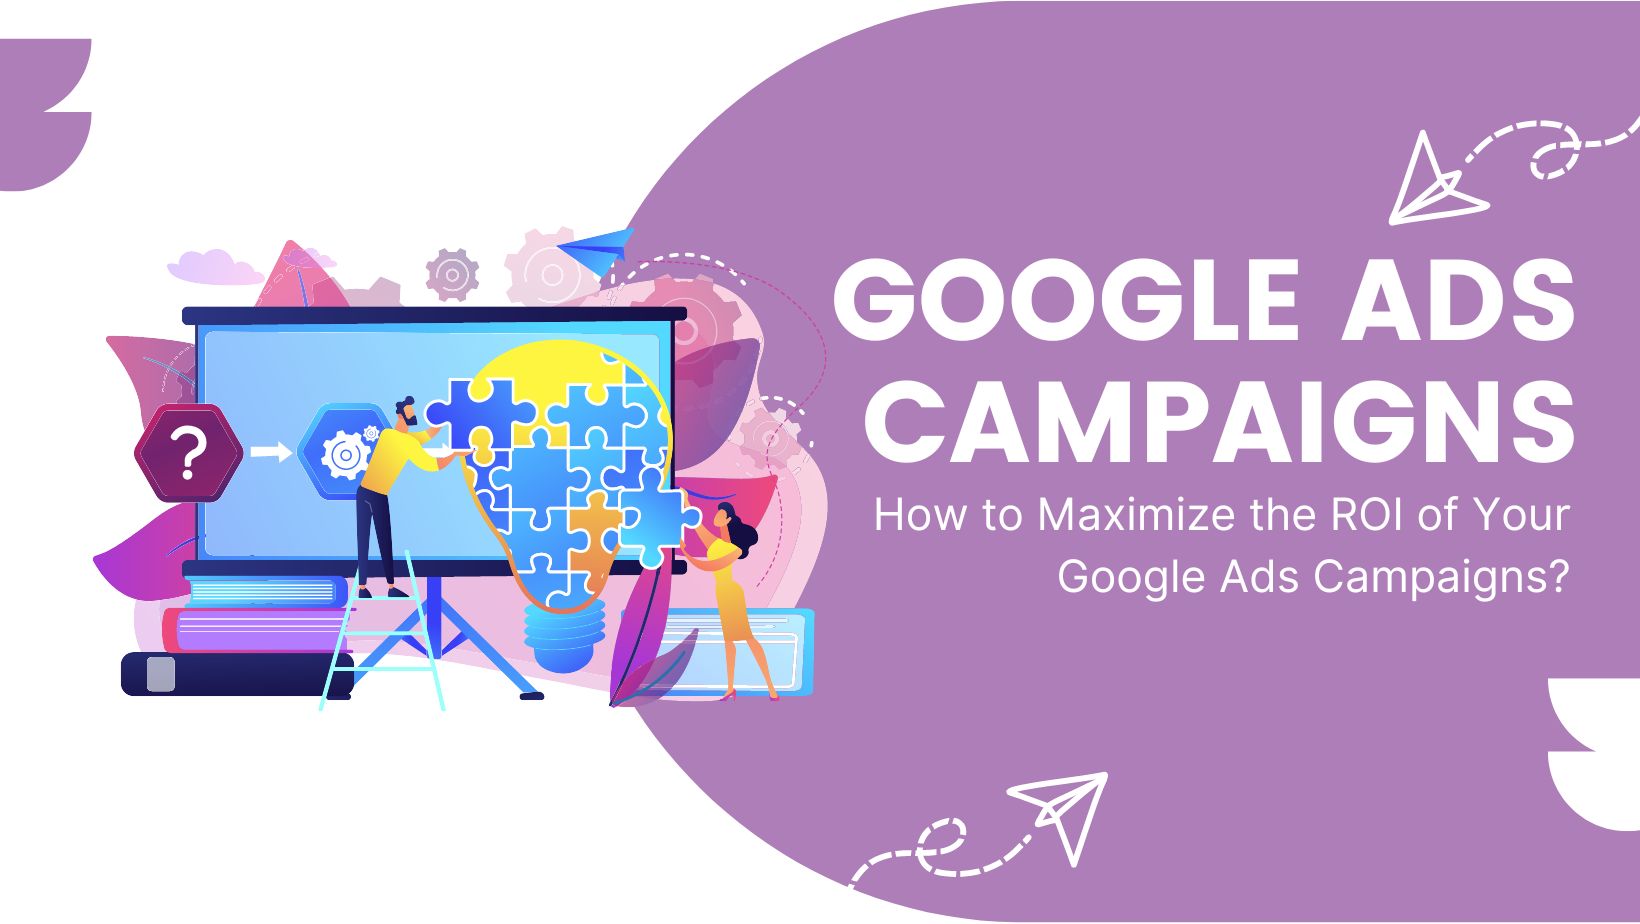 How to Maximize the ROI of Your Google Ads Campaigns?